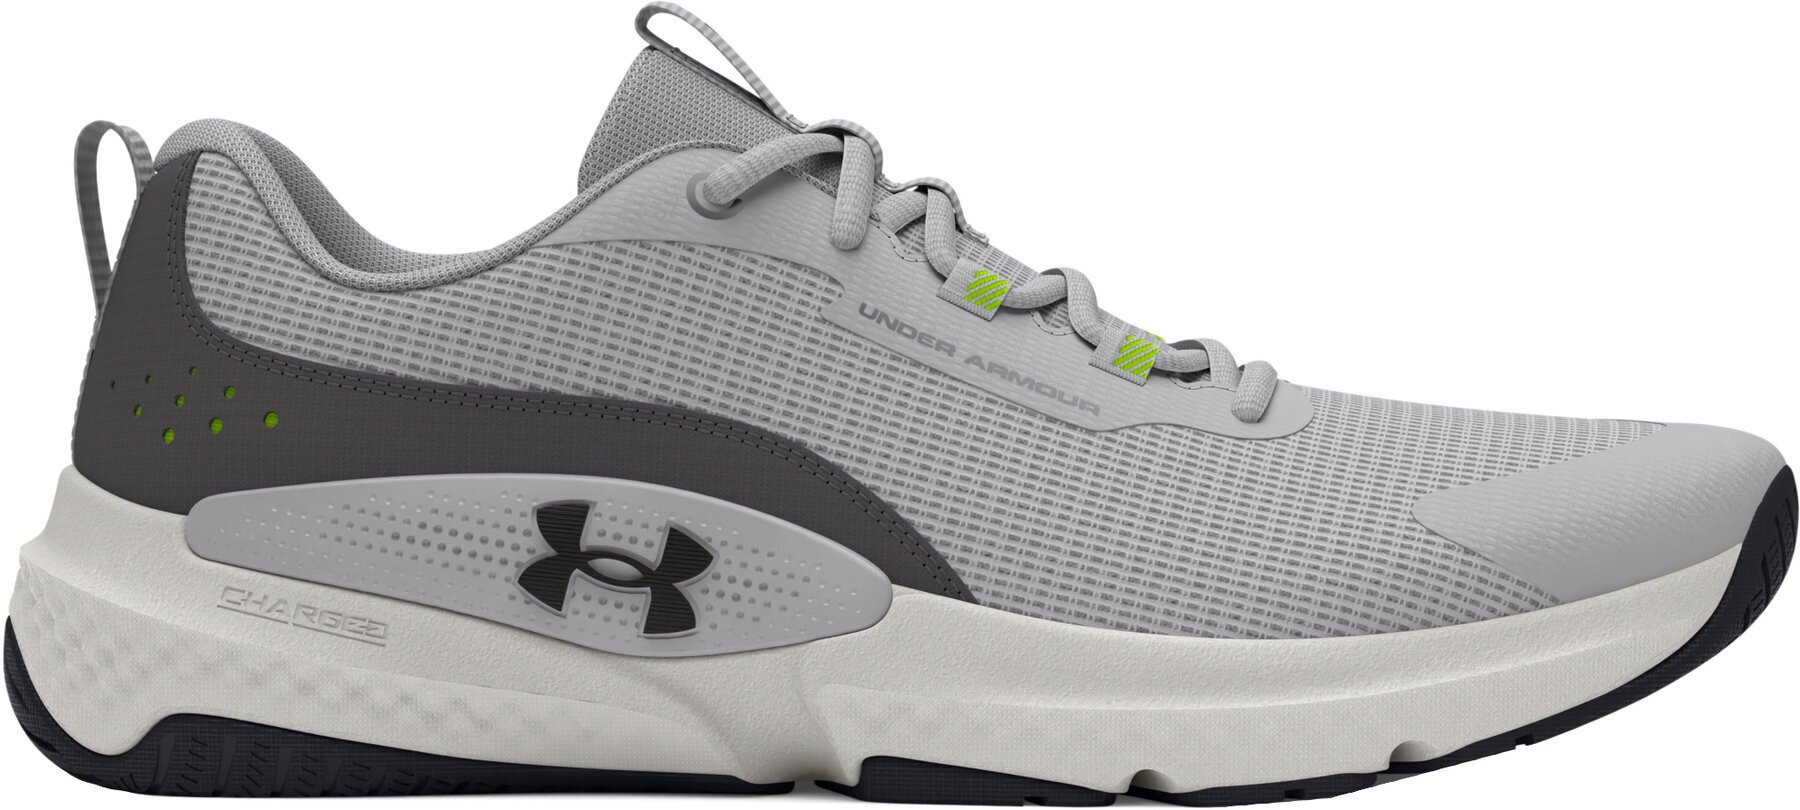 Fitness Παπούτσι Under Armour Men's UA Dynamic Select Training Shoes Mod Gray/Castlerock/Metallic Black 10,5 Fitness Παπούτσι